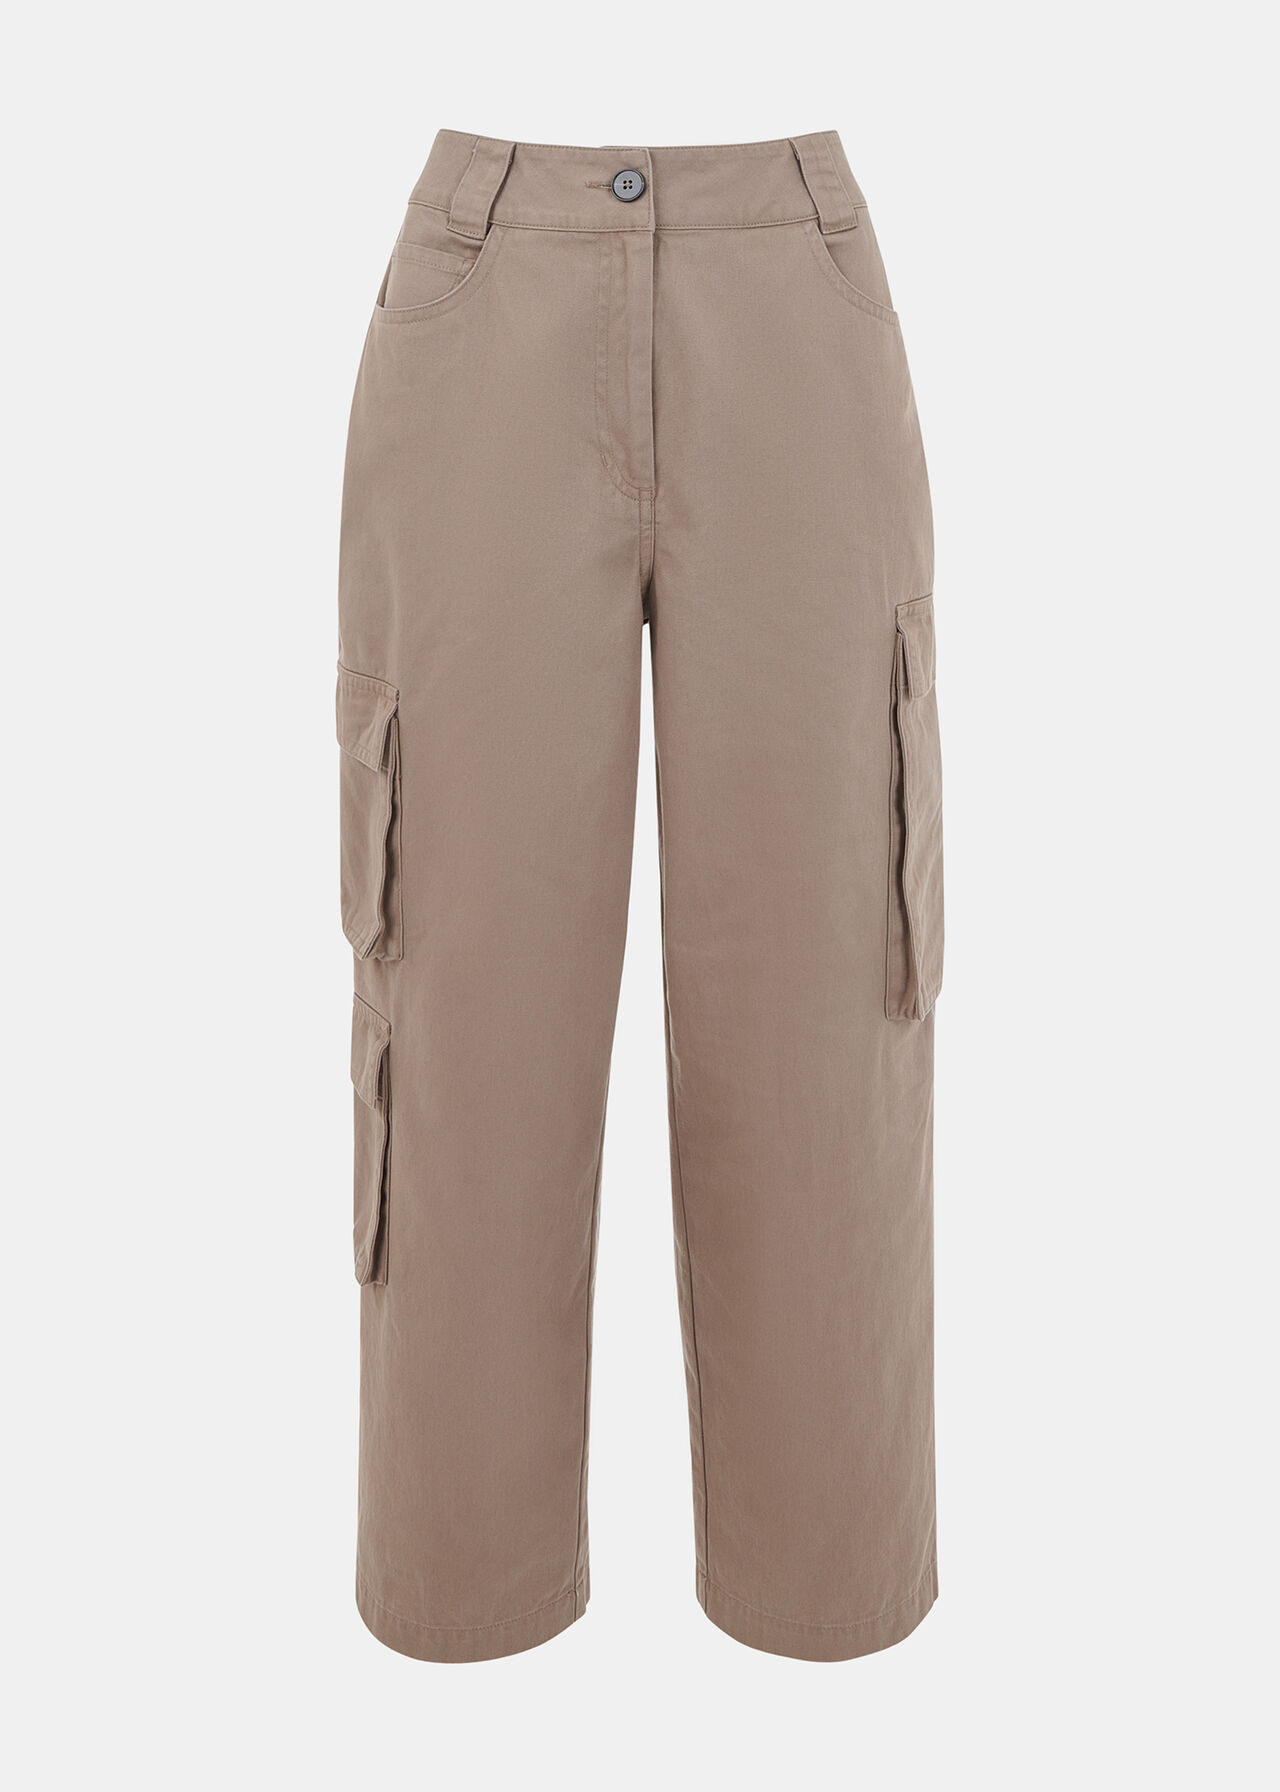 Phoebe Casual Utility Trouser